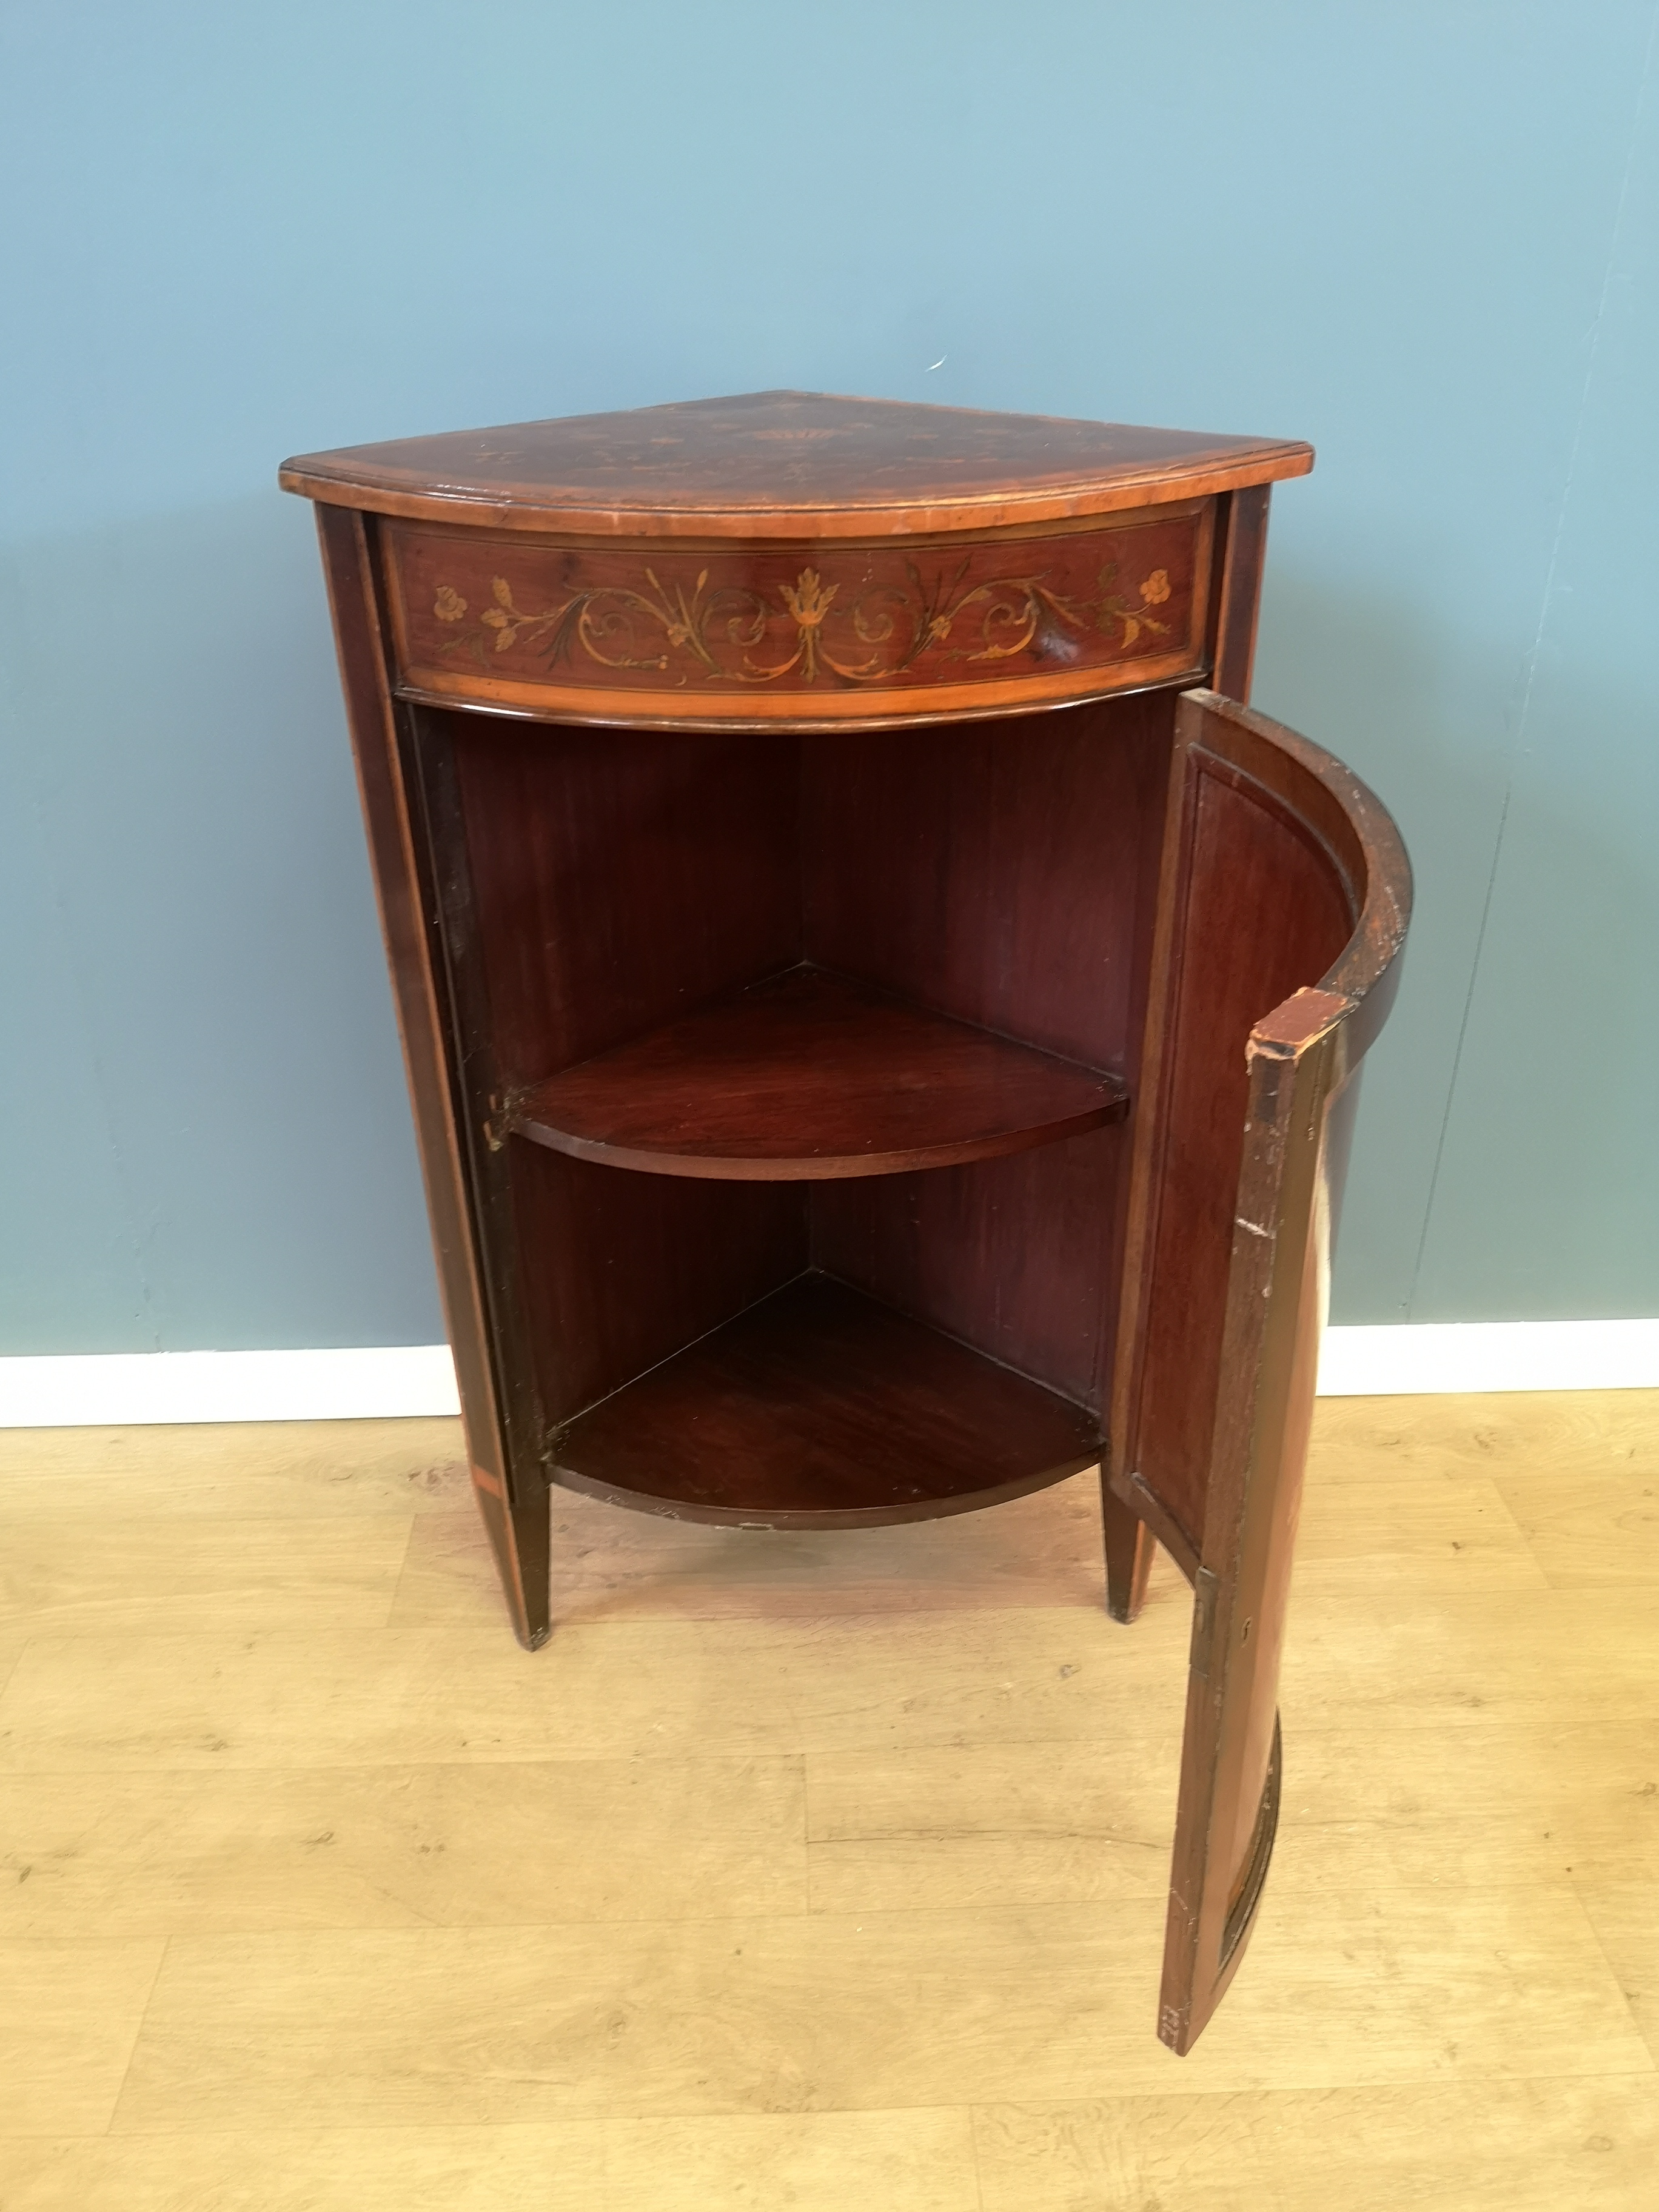 Mahogany bow fronted corner cabinet - Image 4 of 5